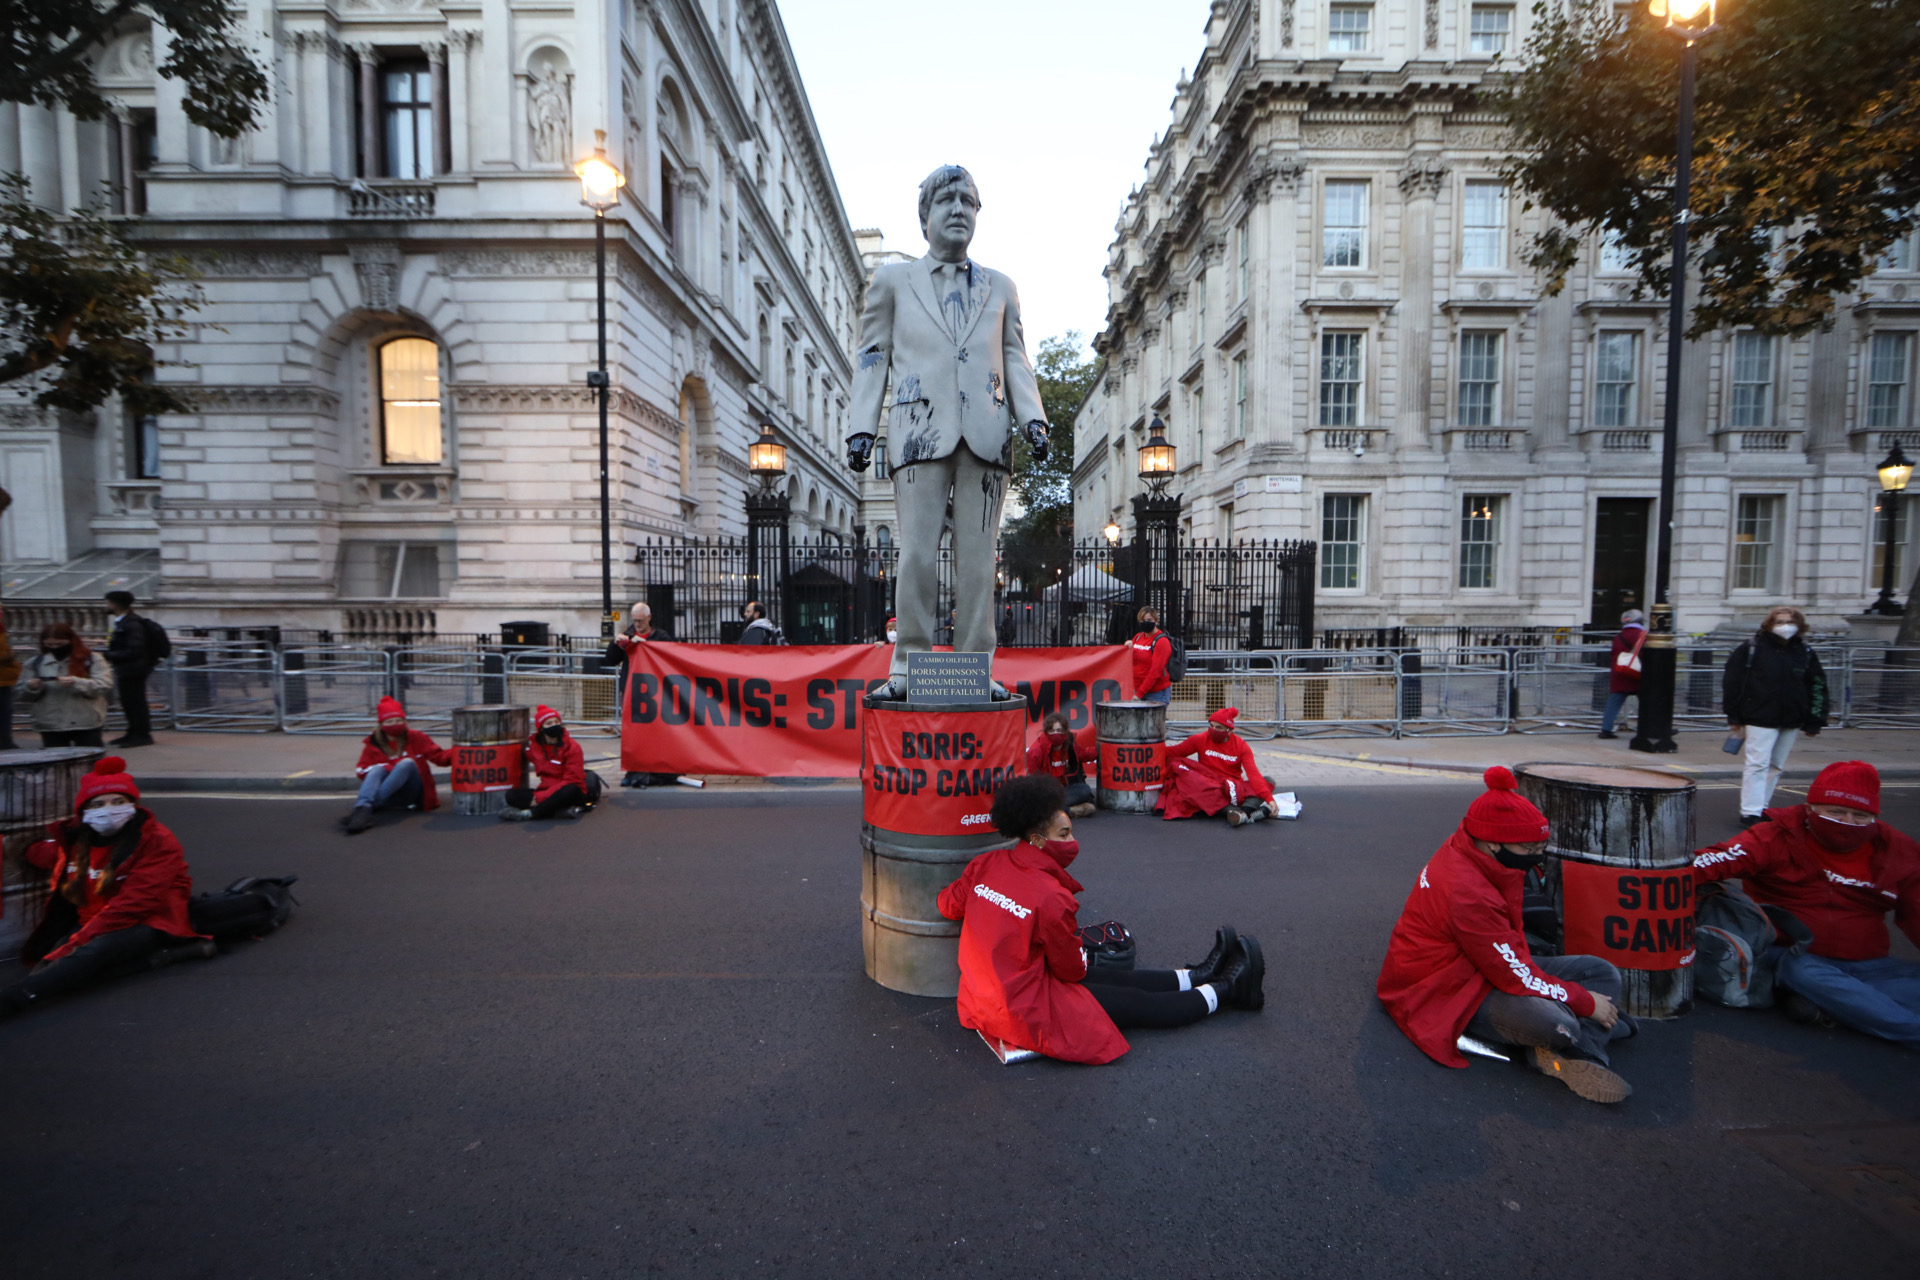 Activists block Downing street with a statue of Boris Johnson dripping in oil